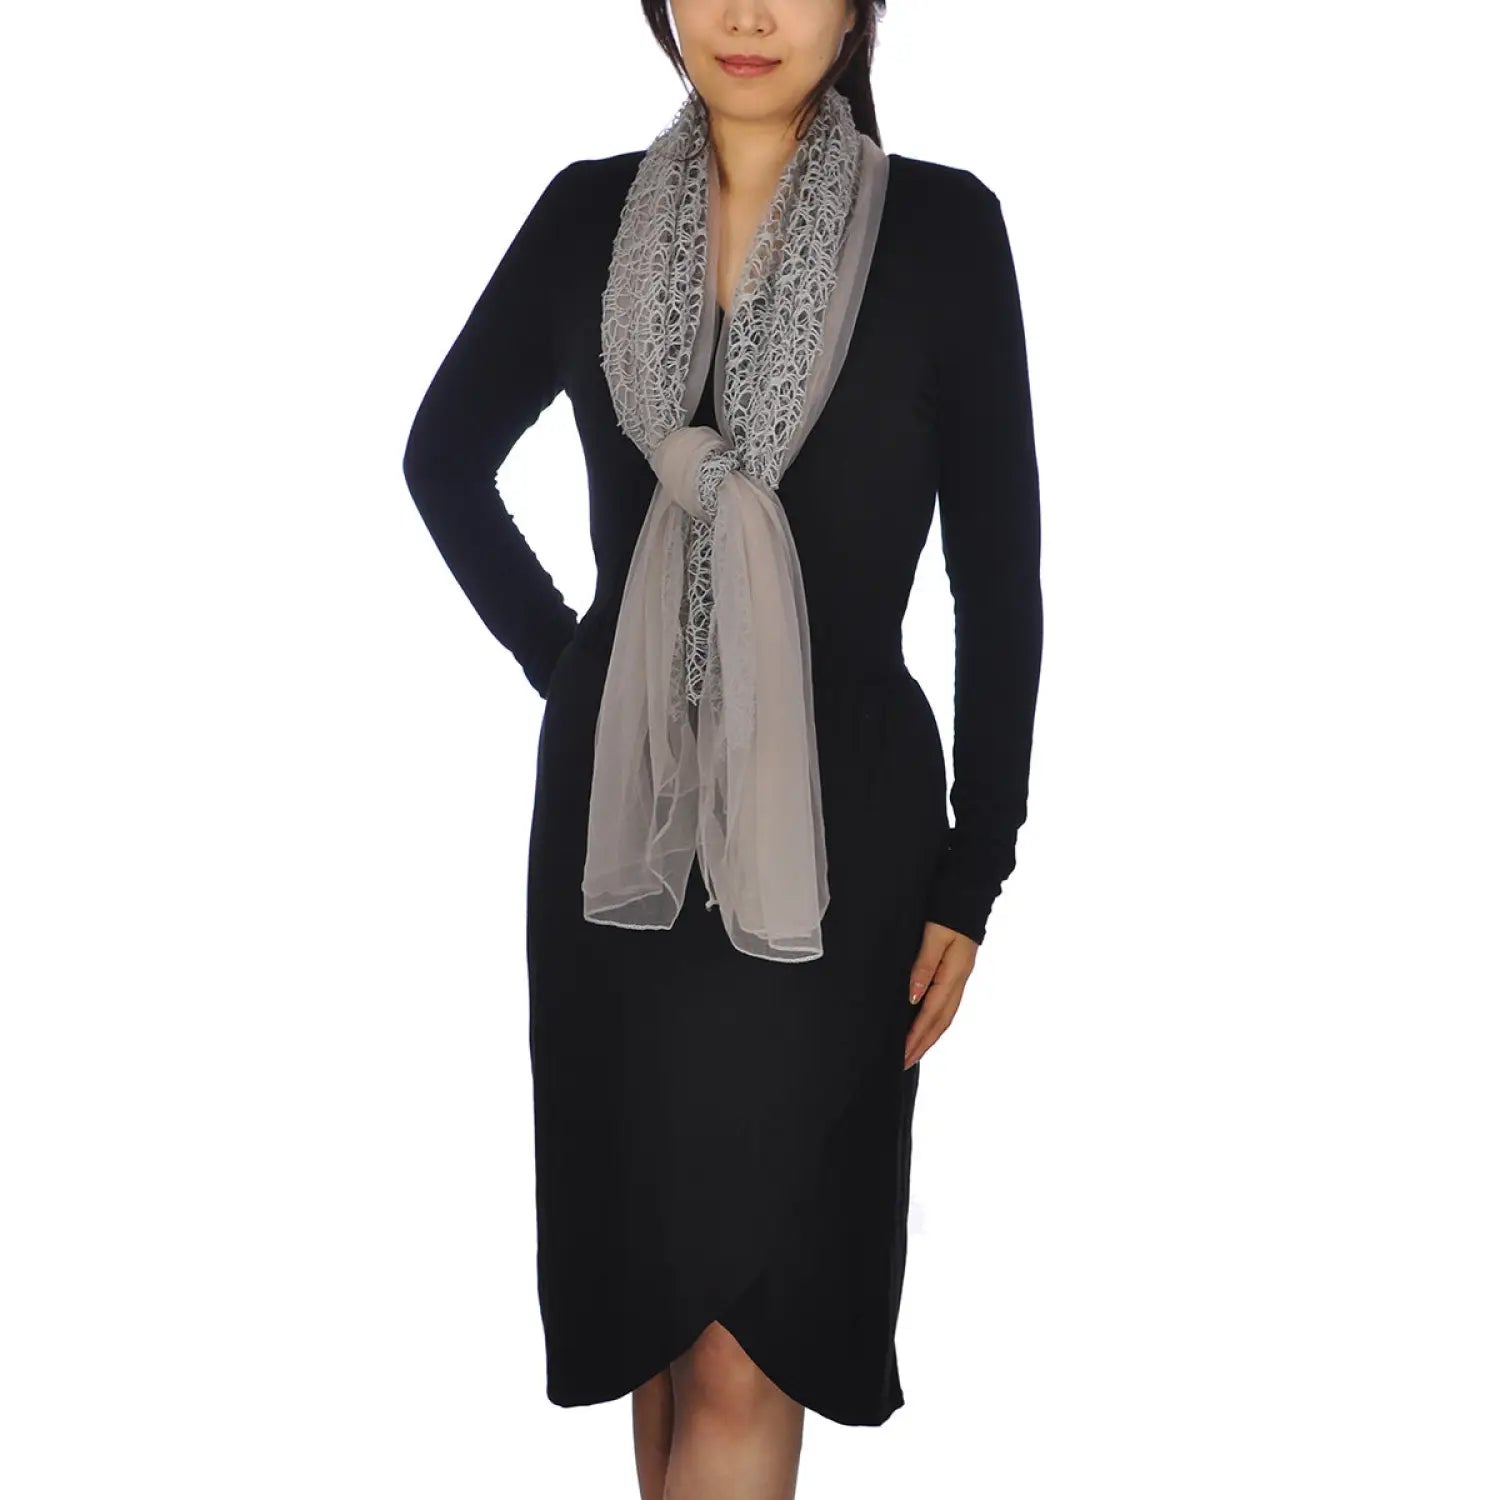 Woman in black dress and gray scarf, wearing Chiffon Cowl Neck Scarf with Rope Detailing.